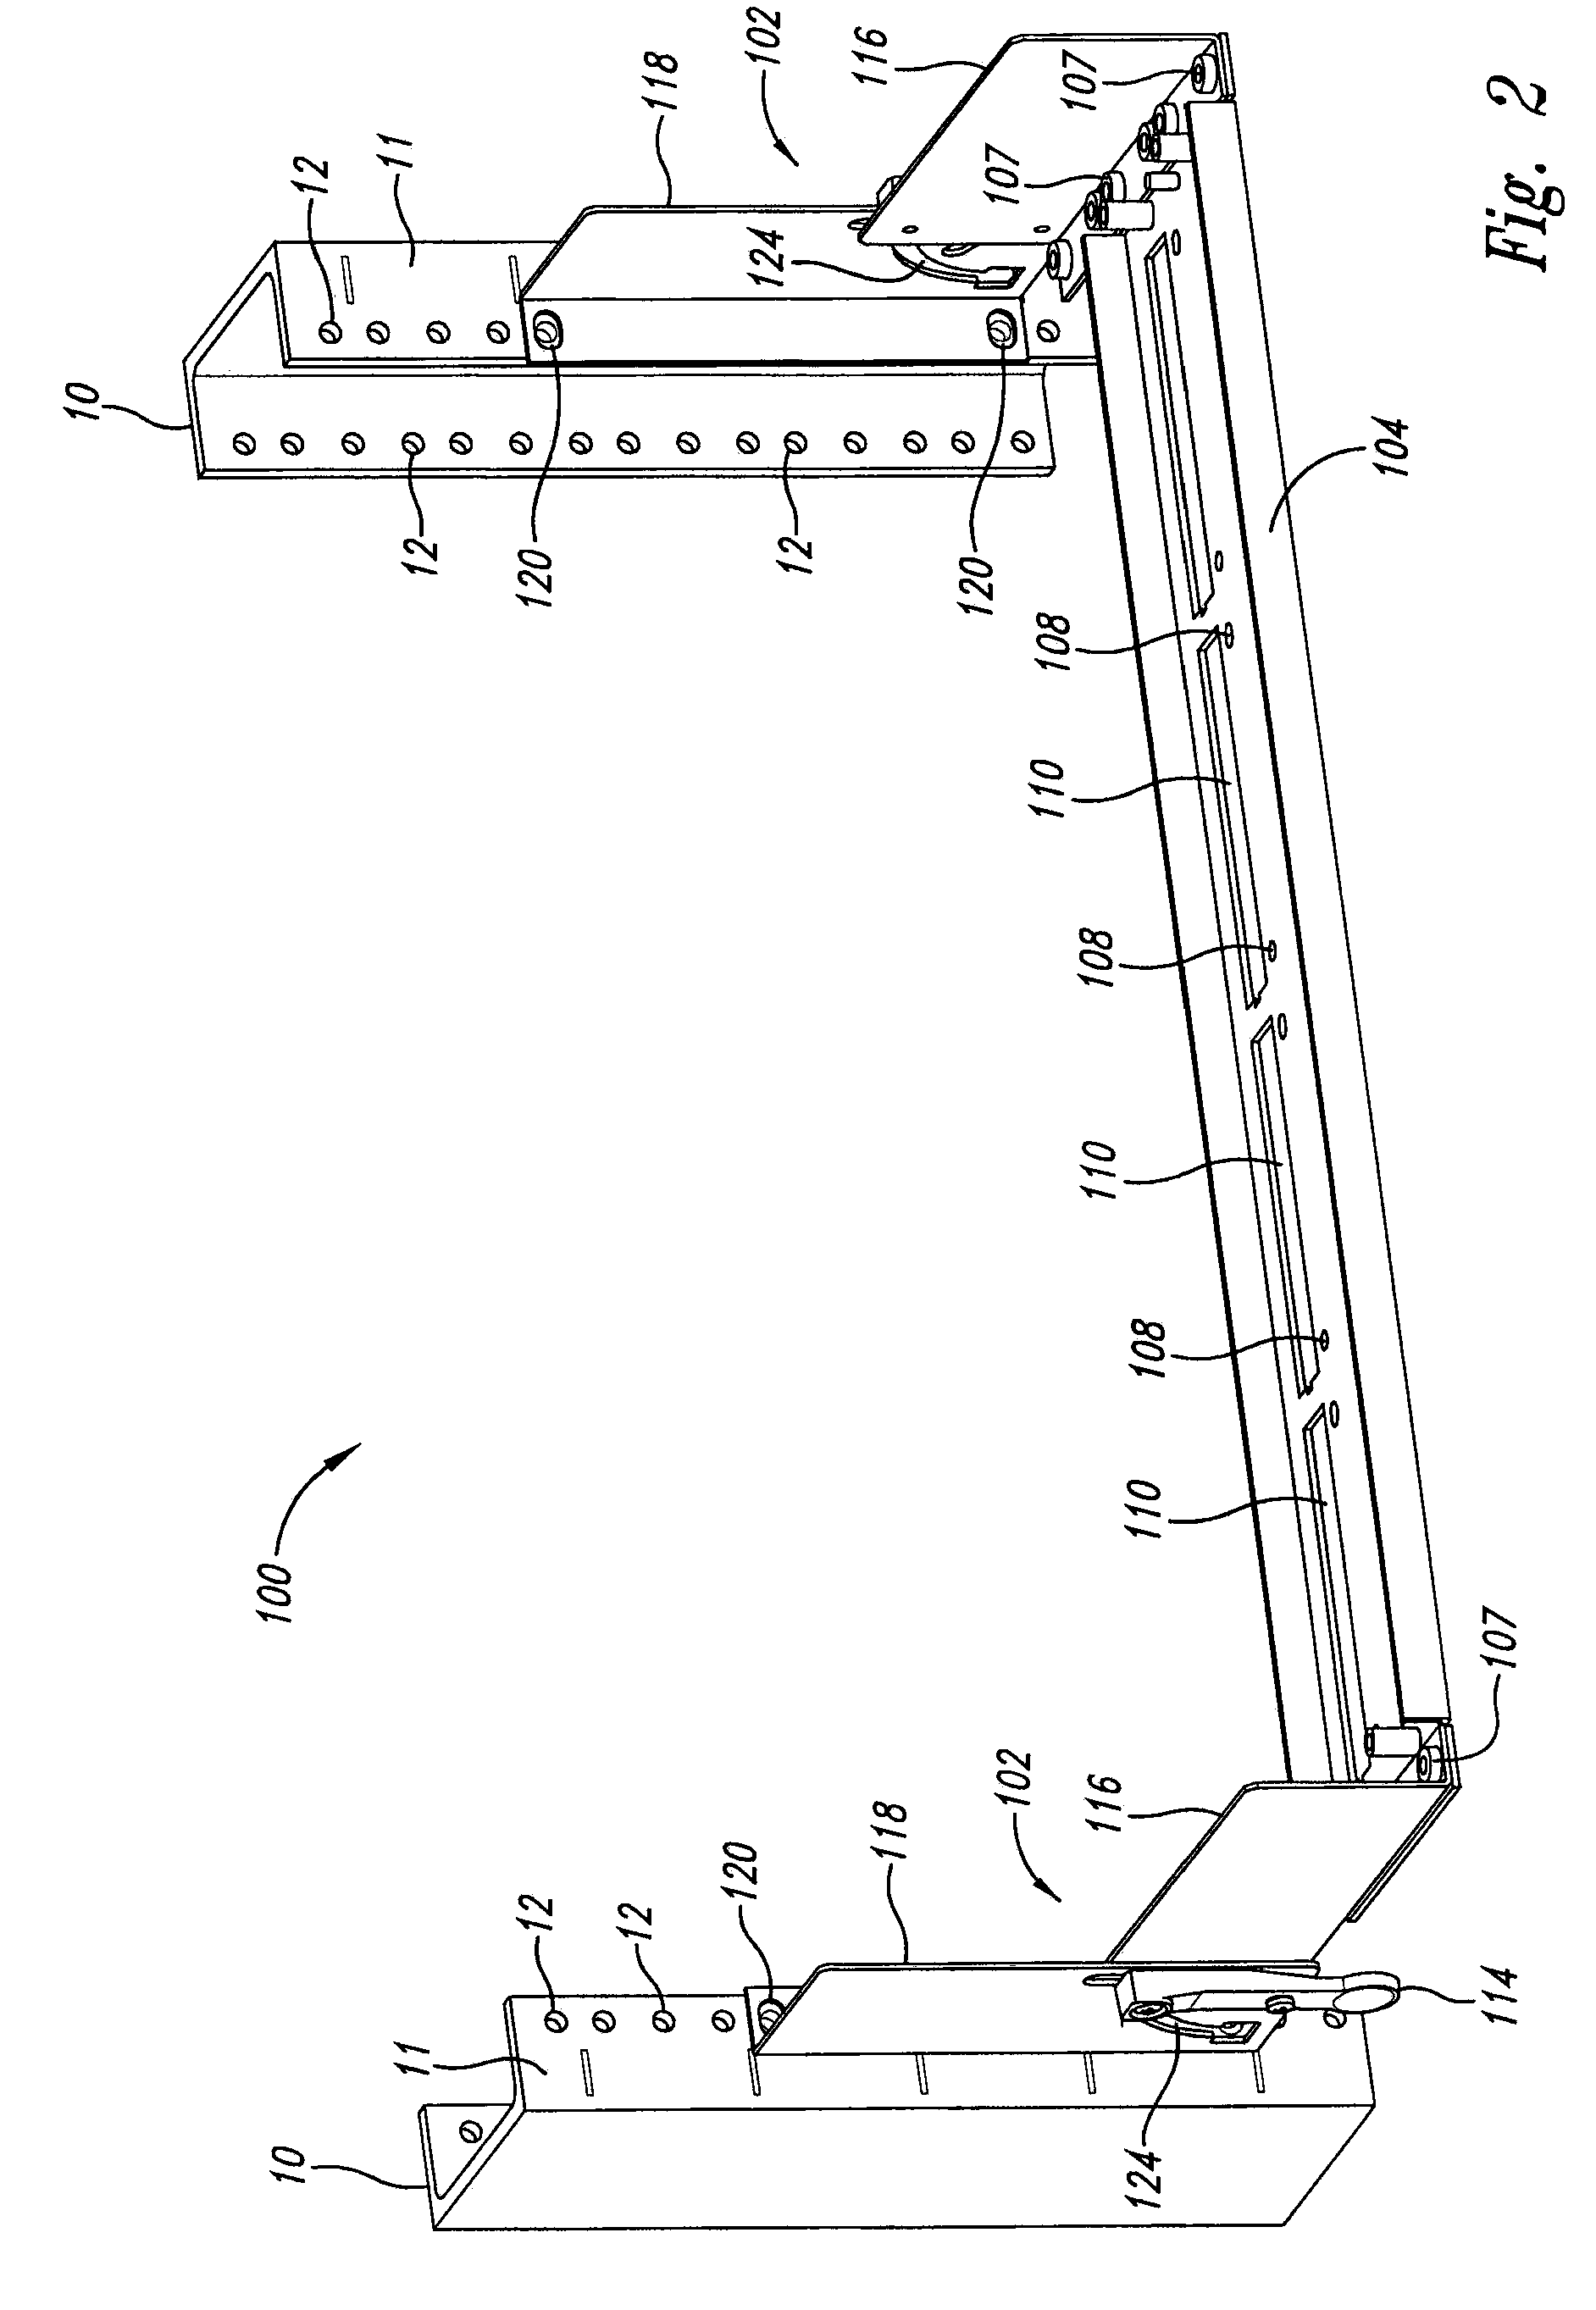 Rack mounted component door system and method